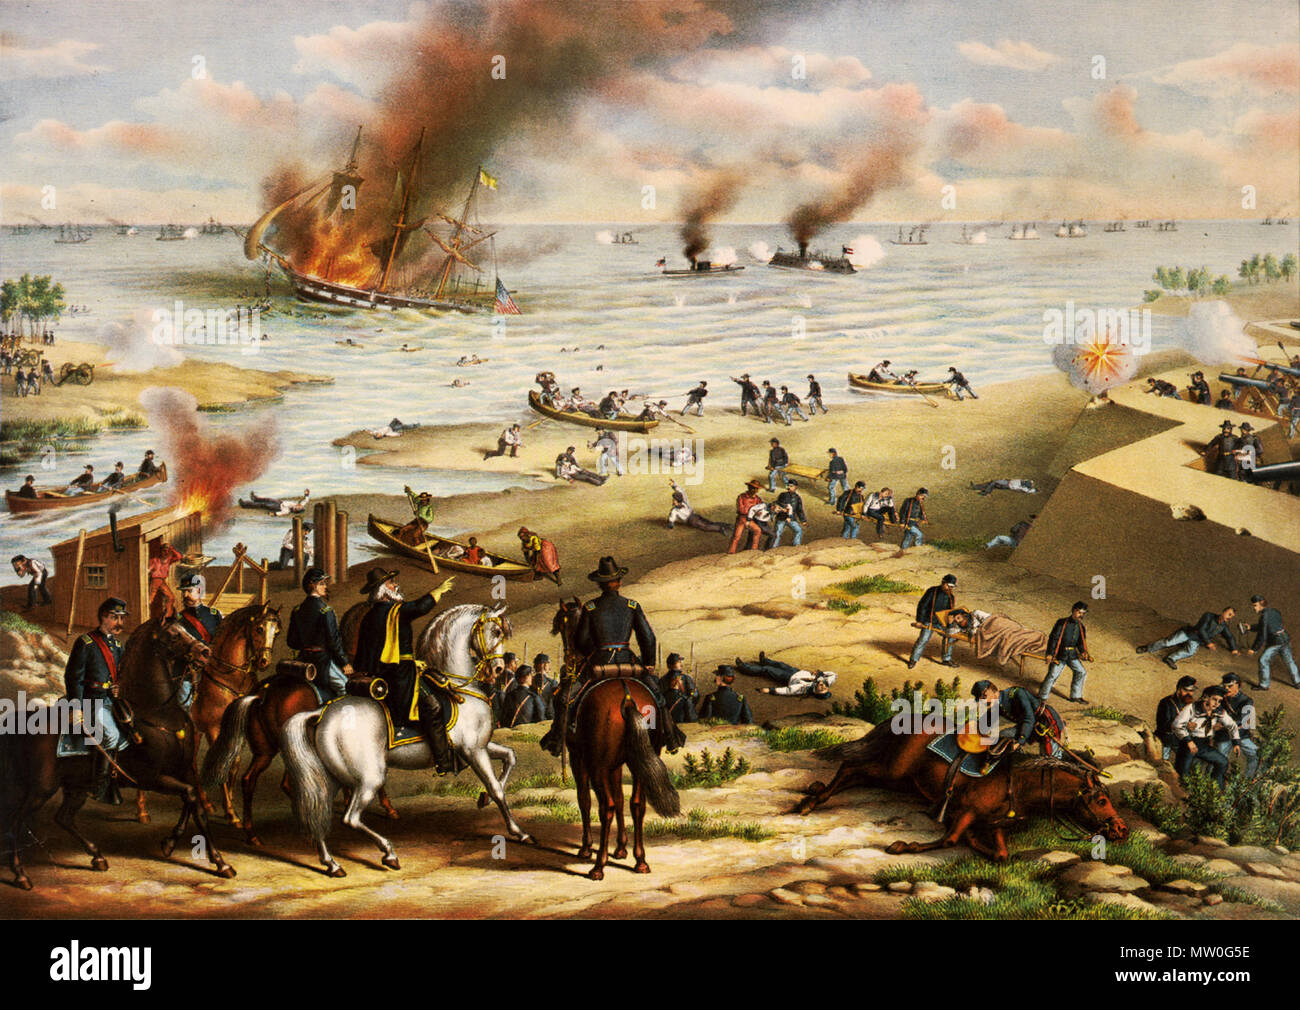 . Battle between the Monitor and Merrimac--fought March 9th 1862 at Hampton Roads, near Norfolk, Va. Print shows a battle scene between the ironclads Monitor and Merrimac just offshore, also shows a Union ship sinking and rescue boats being put to sea from shore, as well as a Union artillery bunker, Union soldiers and officers, and some rescued sailors. c1889 Aug. 31.  75 Battle of Hampton Roads 3g01752u Stock Photo